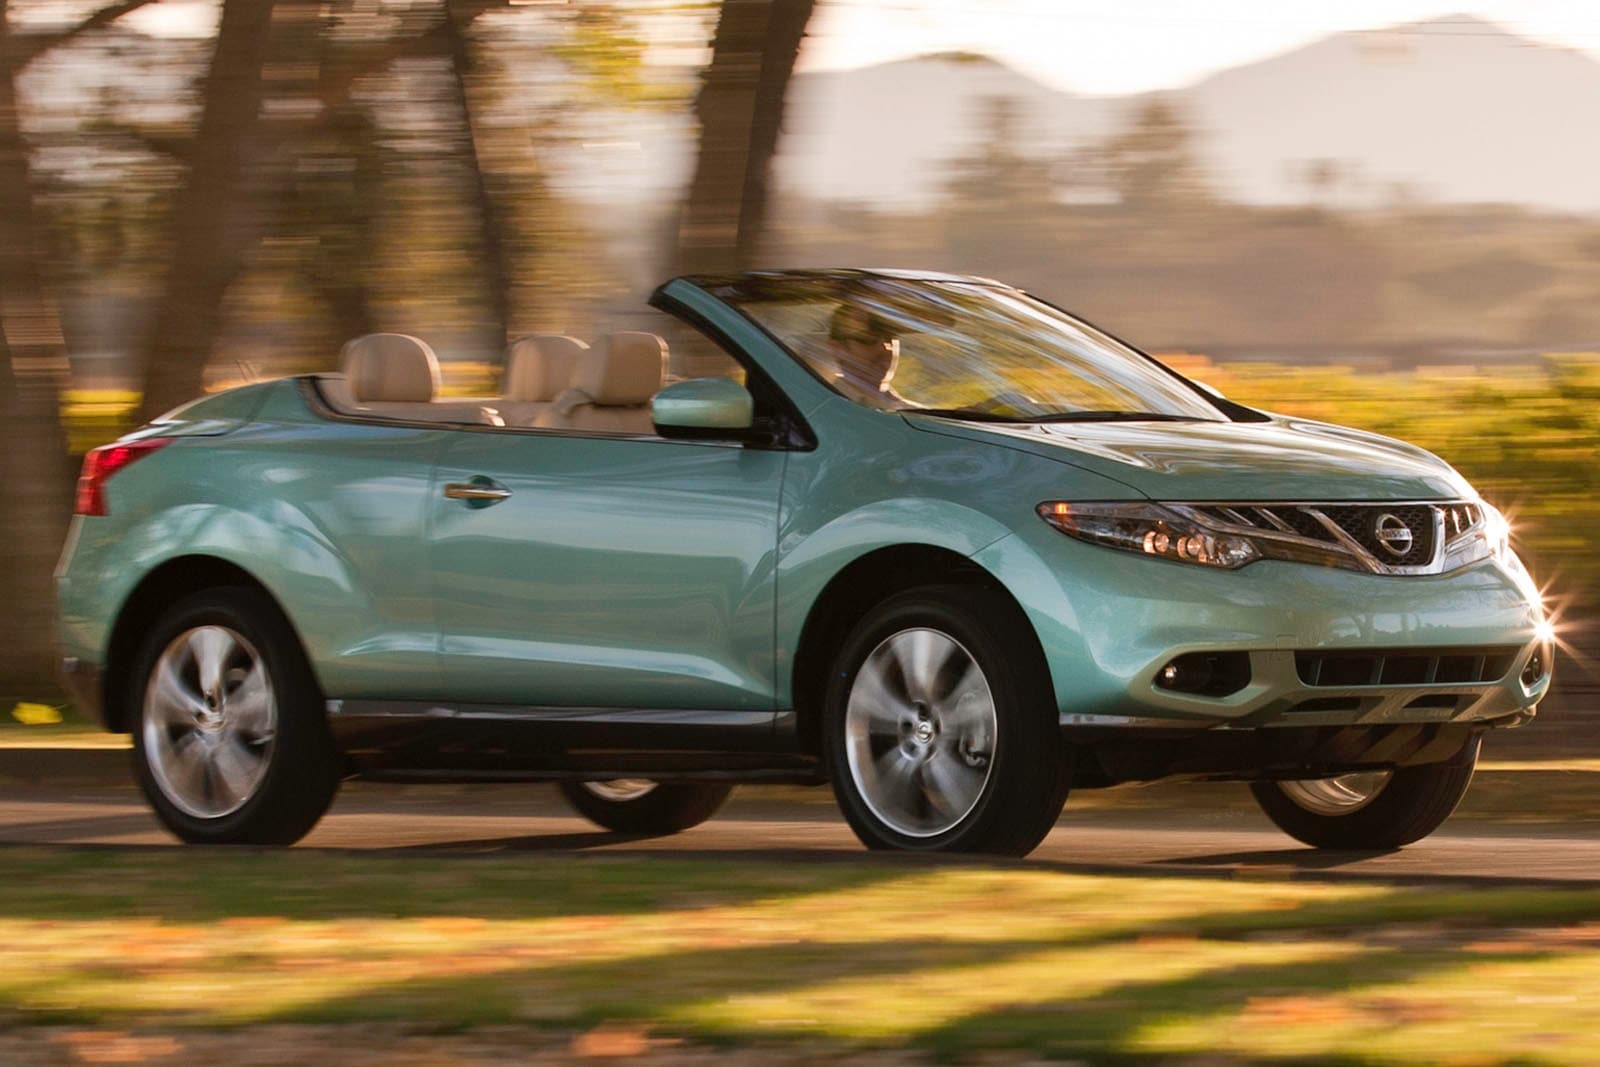 2012 Nissan Murano CrossCabriolet Review & Ratings | Edmunds